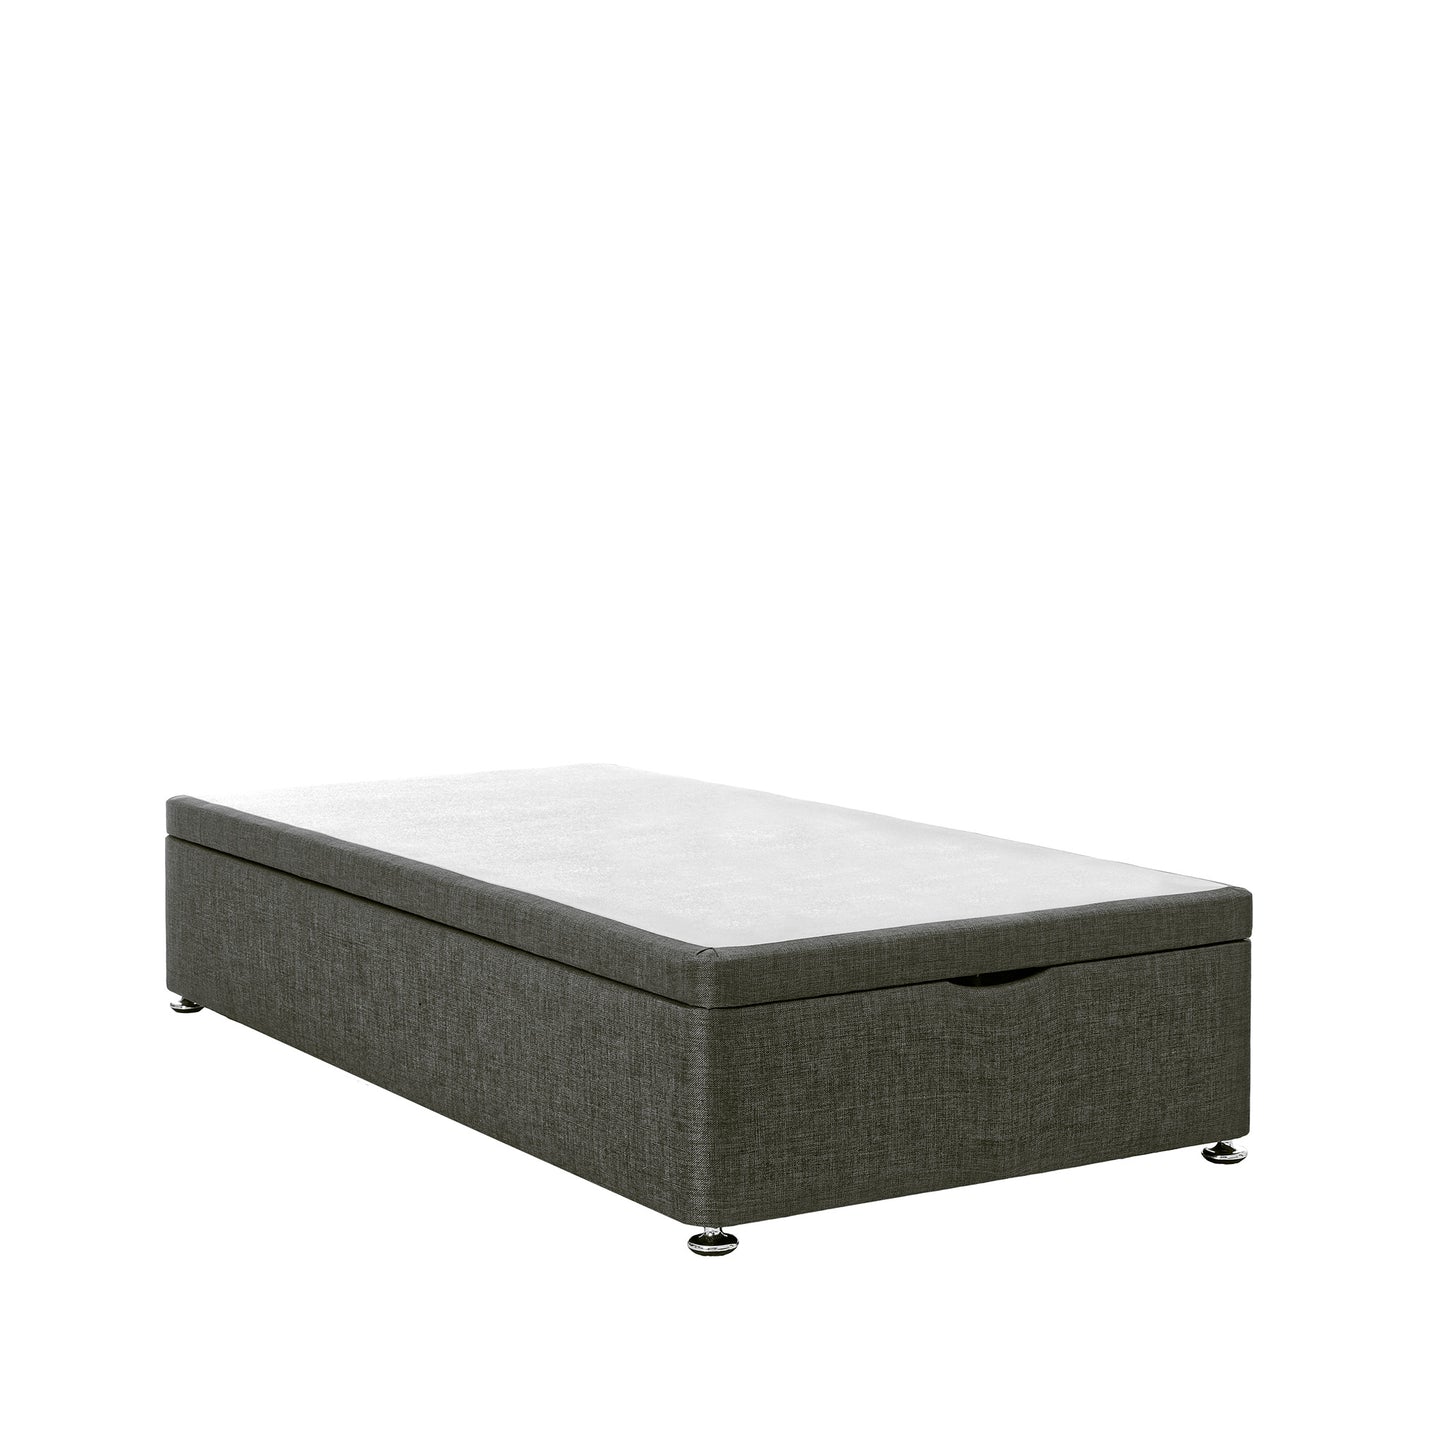 Airsprung End-Lift Single Charcoal Ottoman Closed